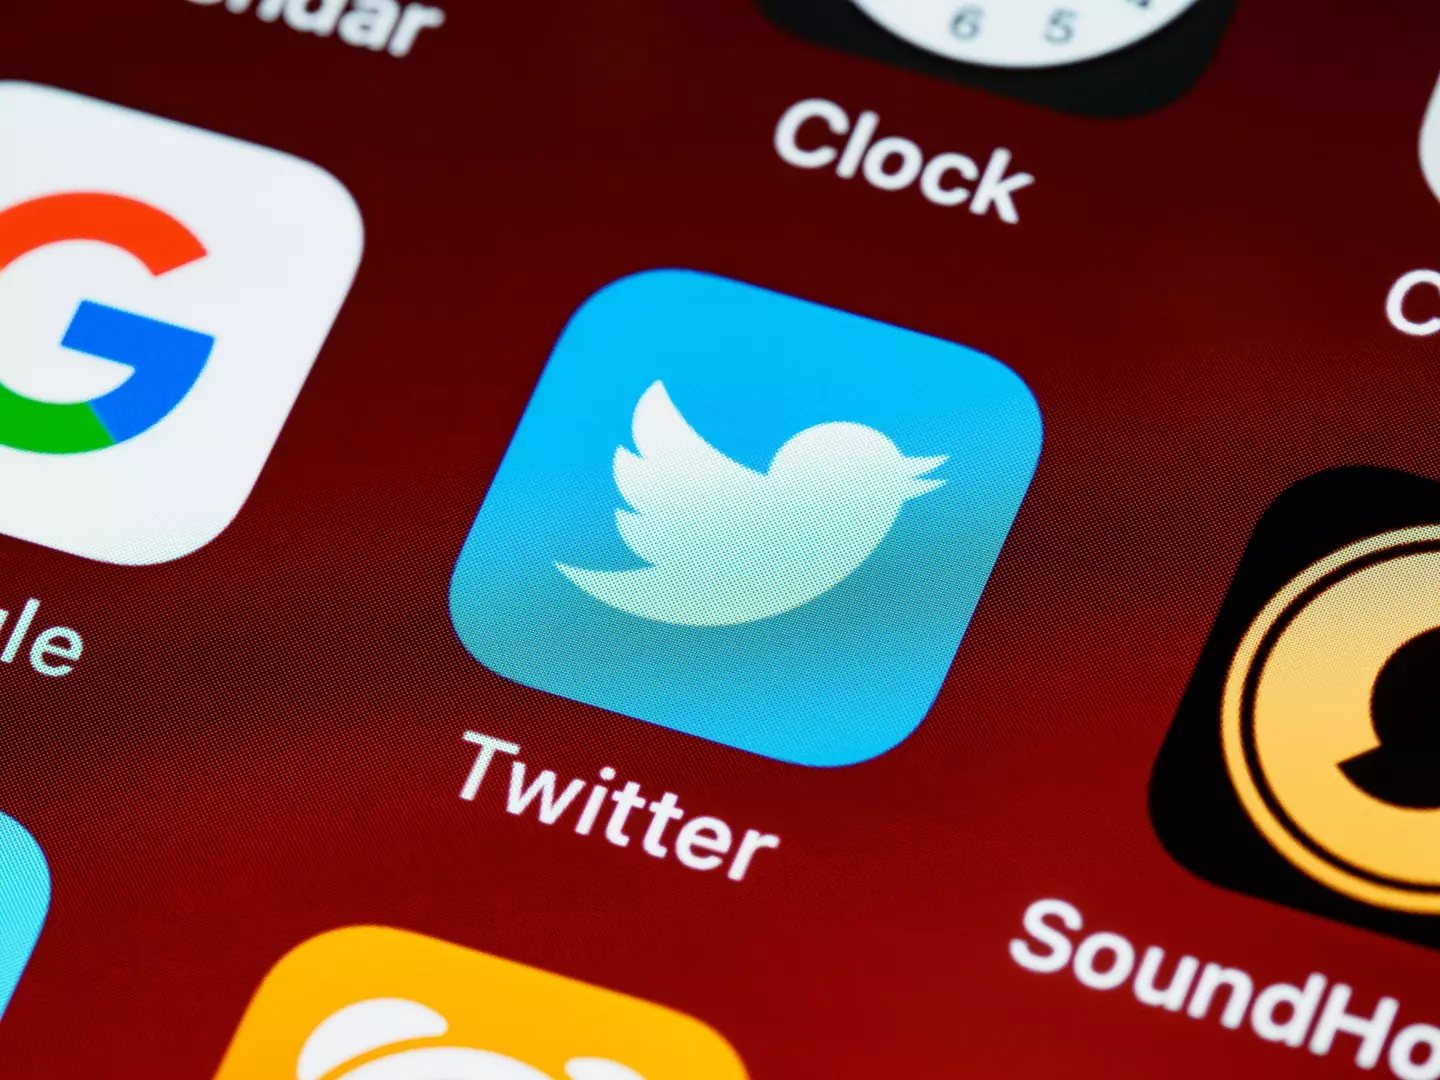 The Twitter bird could soon become a thing of the past.